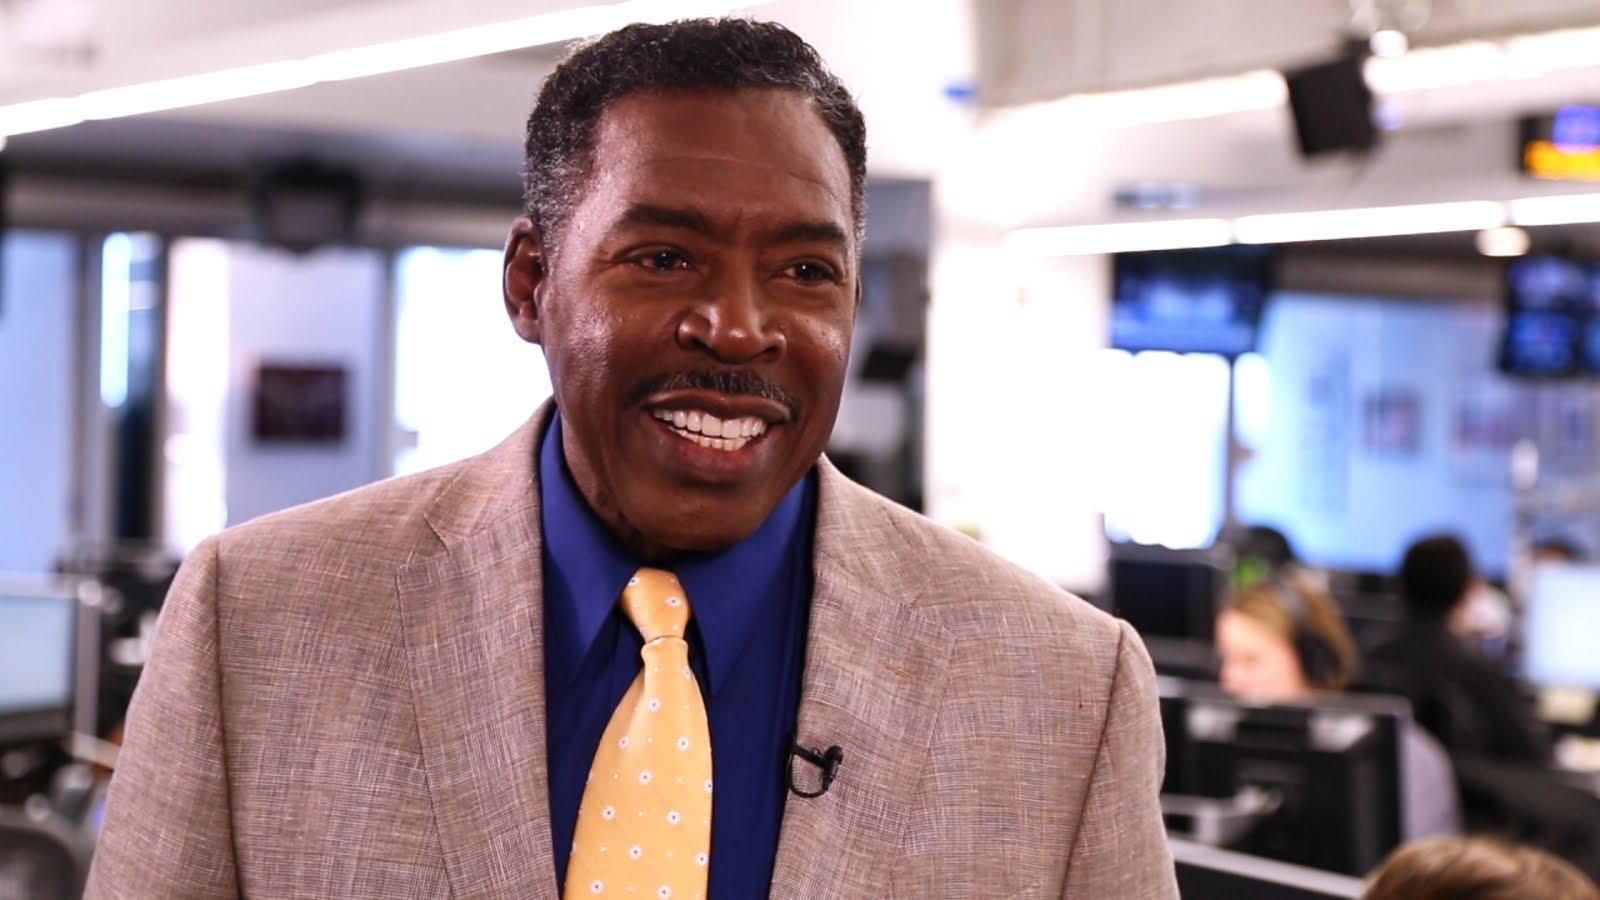 Ghostbuster' Ernie Hudson Plays 'Who You Gonna Call?' at ABC News